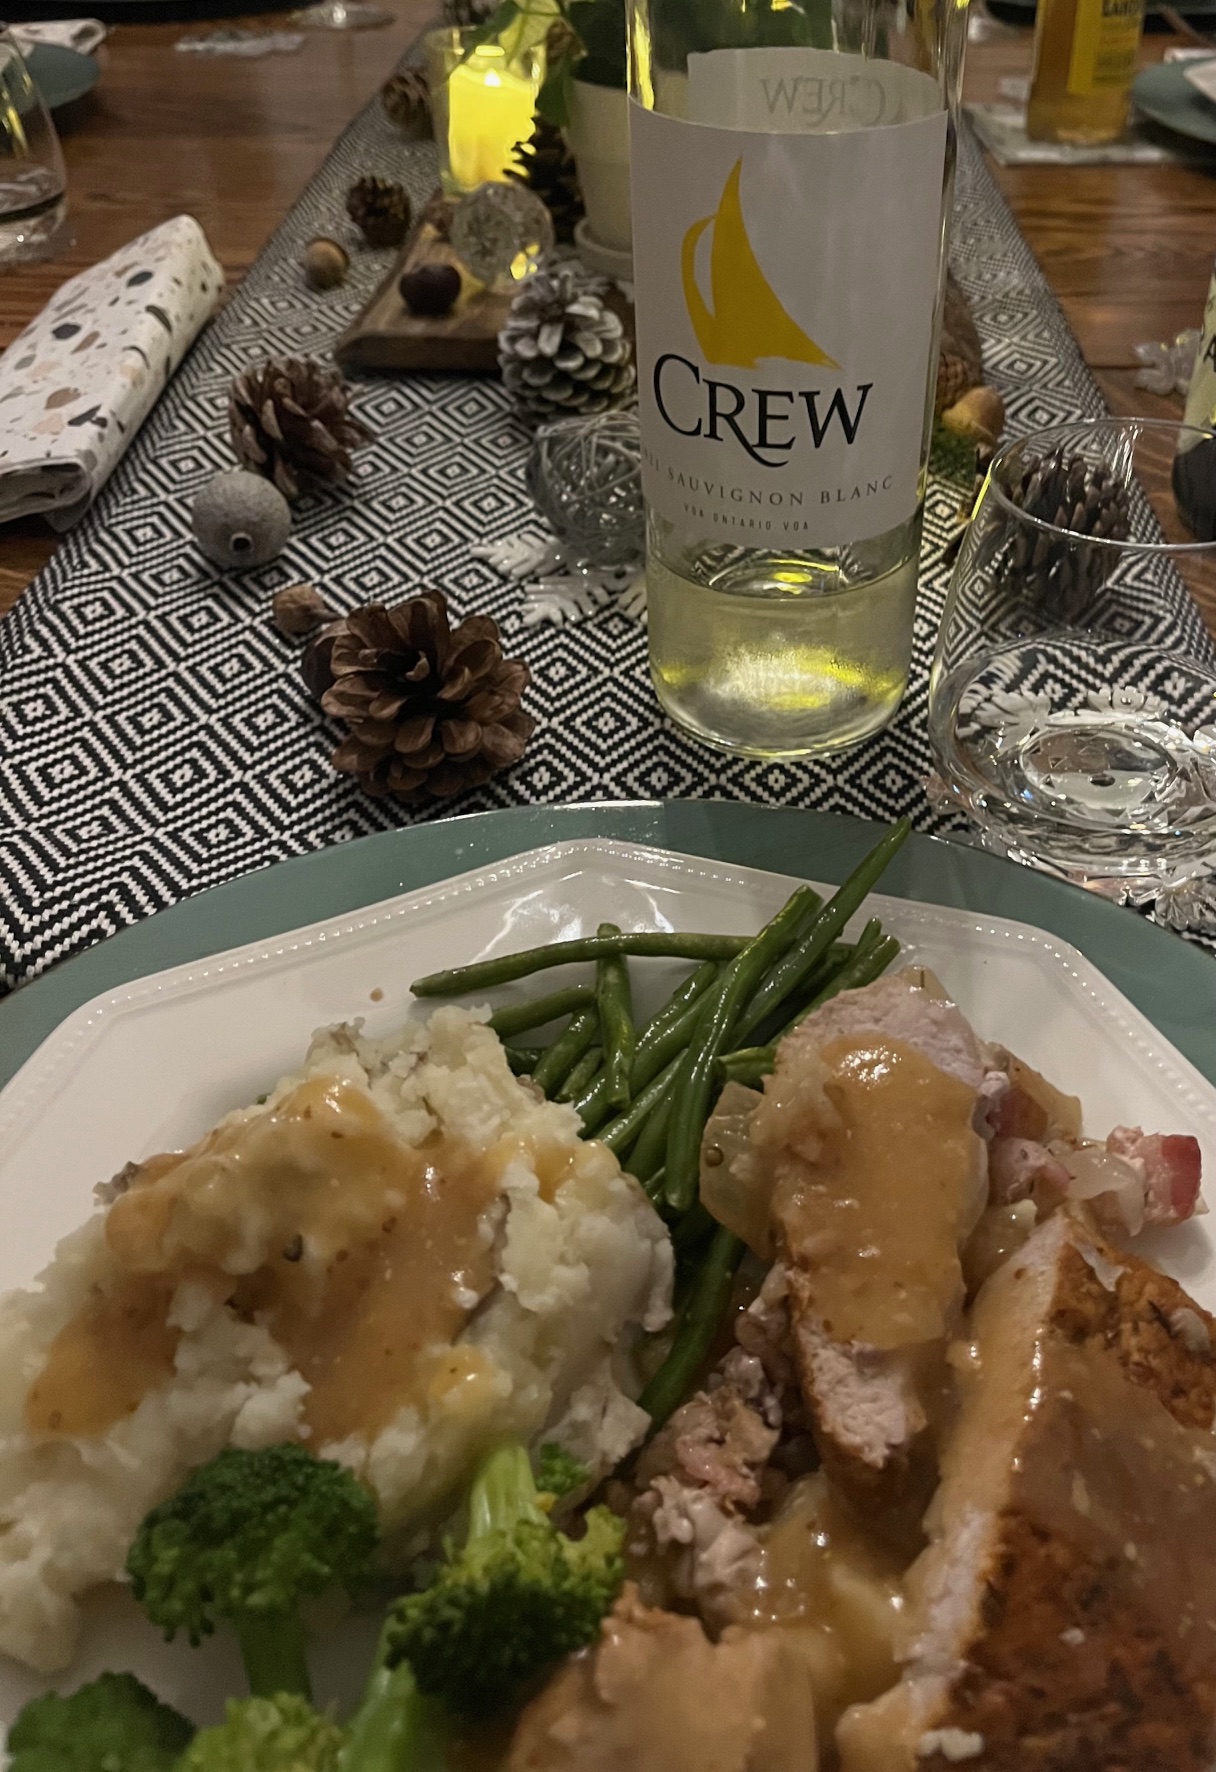 Featured image for “CREW 2021 Sauvignon Blanc with Stuffed Pork Roast with Apple Whiskey Gravy”